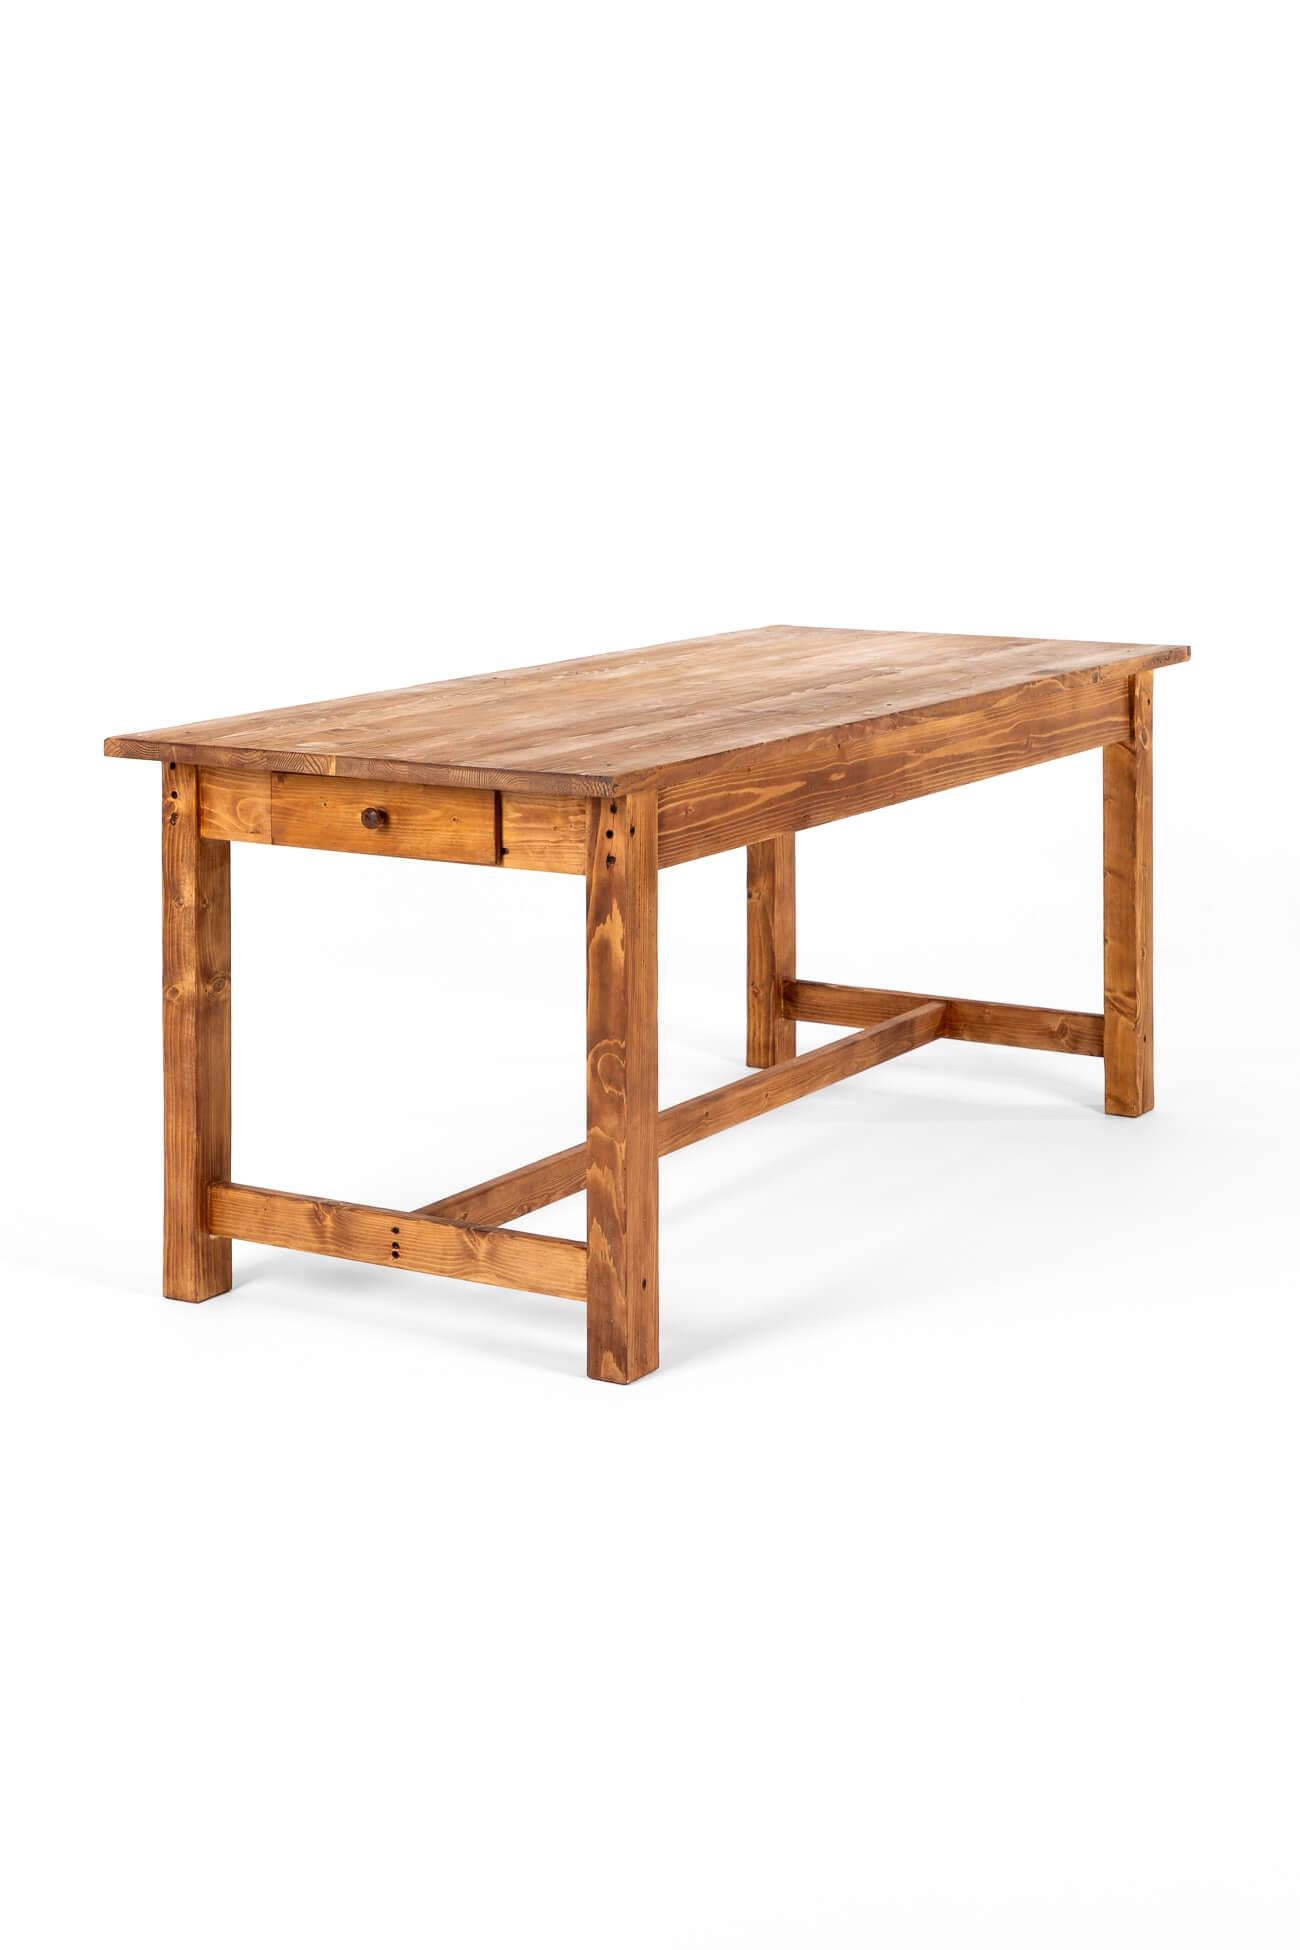 A lovely French farmhouse table with a rich honey colour finish to the table top and base.

The single plank top is raised on four block legs united with an H-shaped stretcher, accompanied by a single drawer to one end.

This wonderful table would